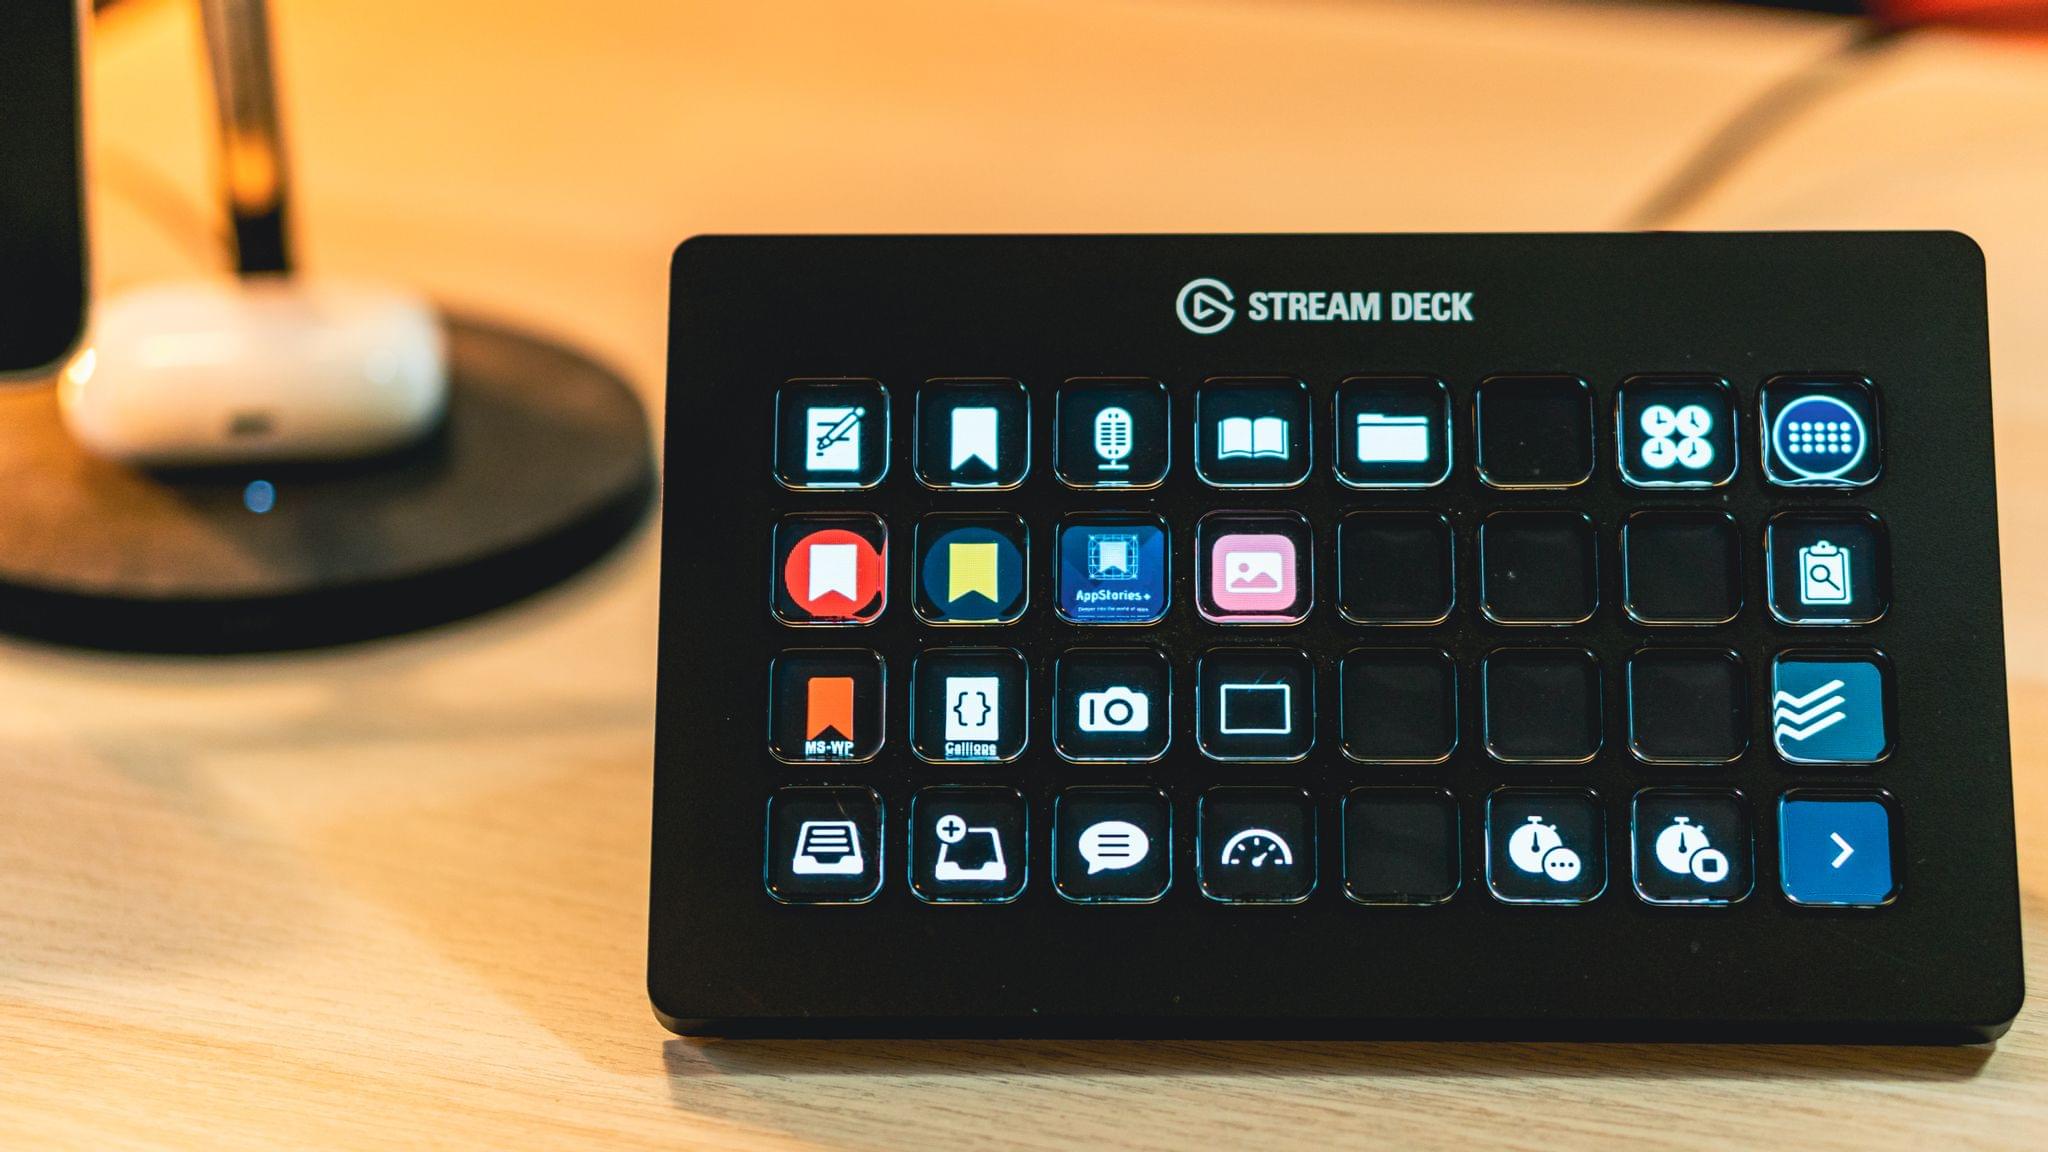 Getting Started with Shortcuts for Mac and the Stream Deck